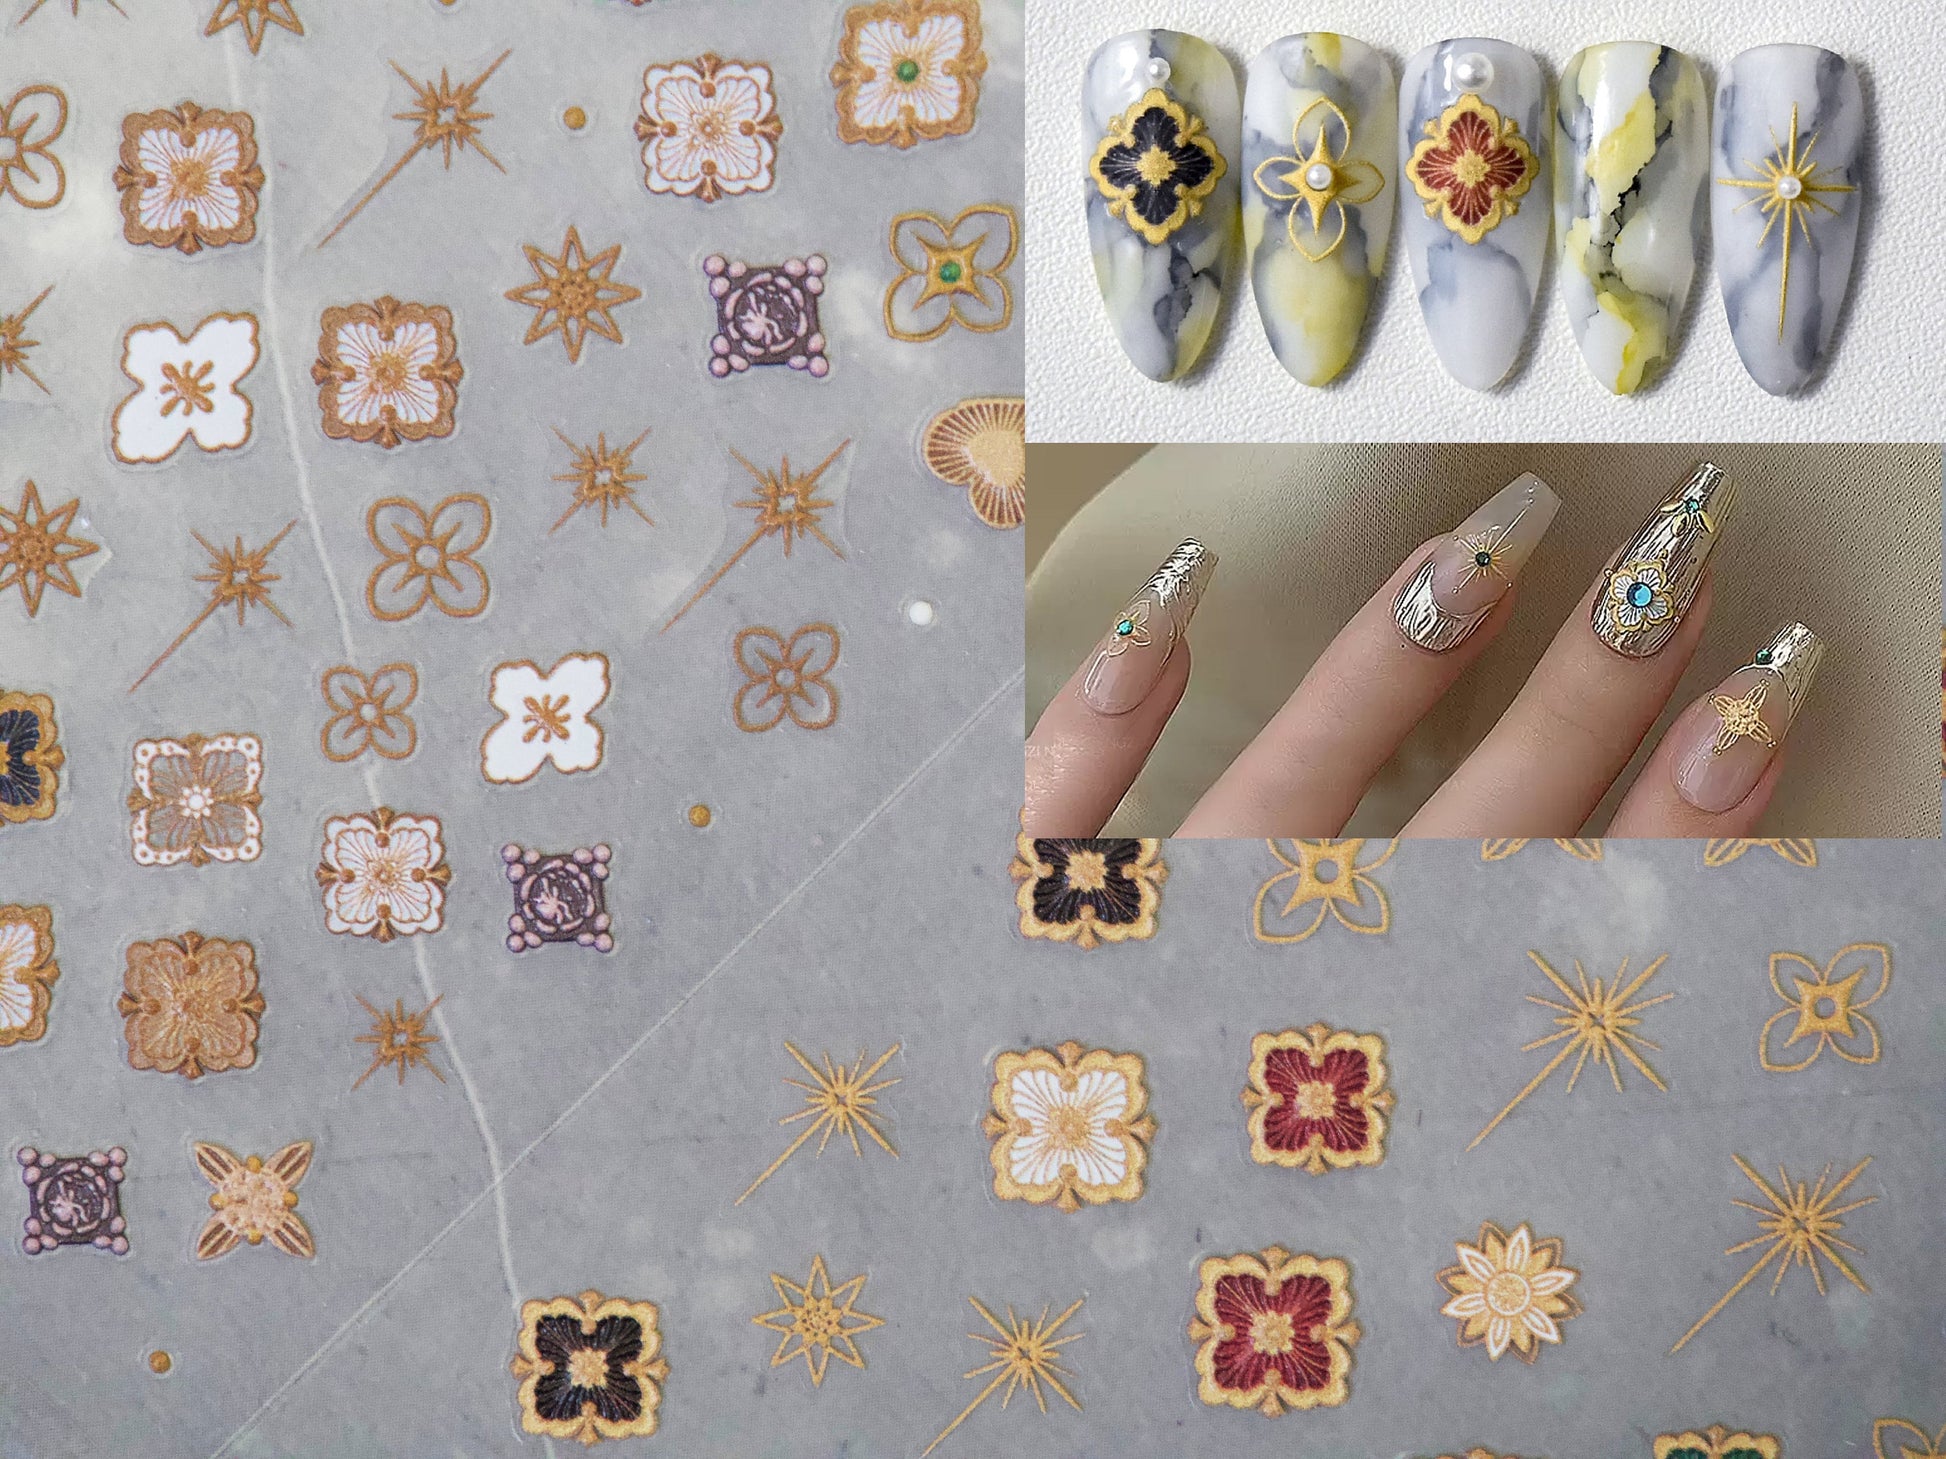 Italian Inspired Vintage Nail Stickers Nail sticker/ Ornate Aesthetic Gold Opera Tulle 3D Embossed Stickers for Nail Art Mindful Nails